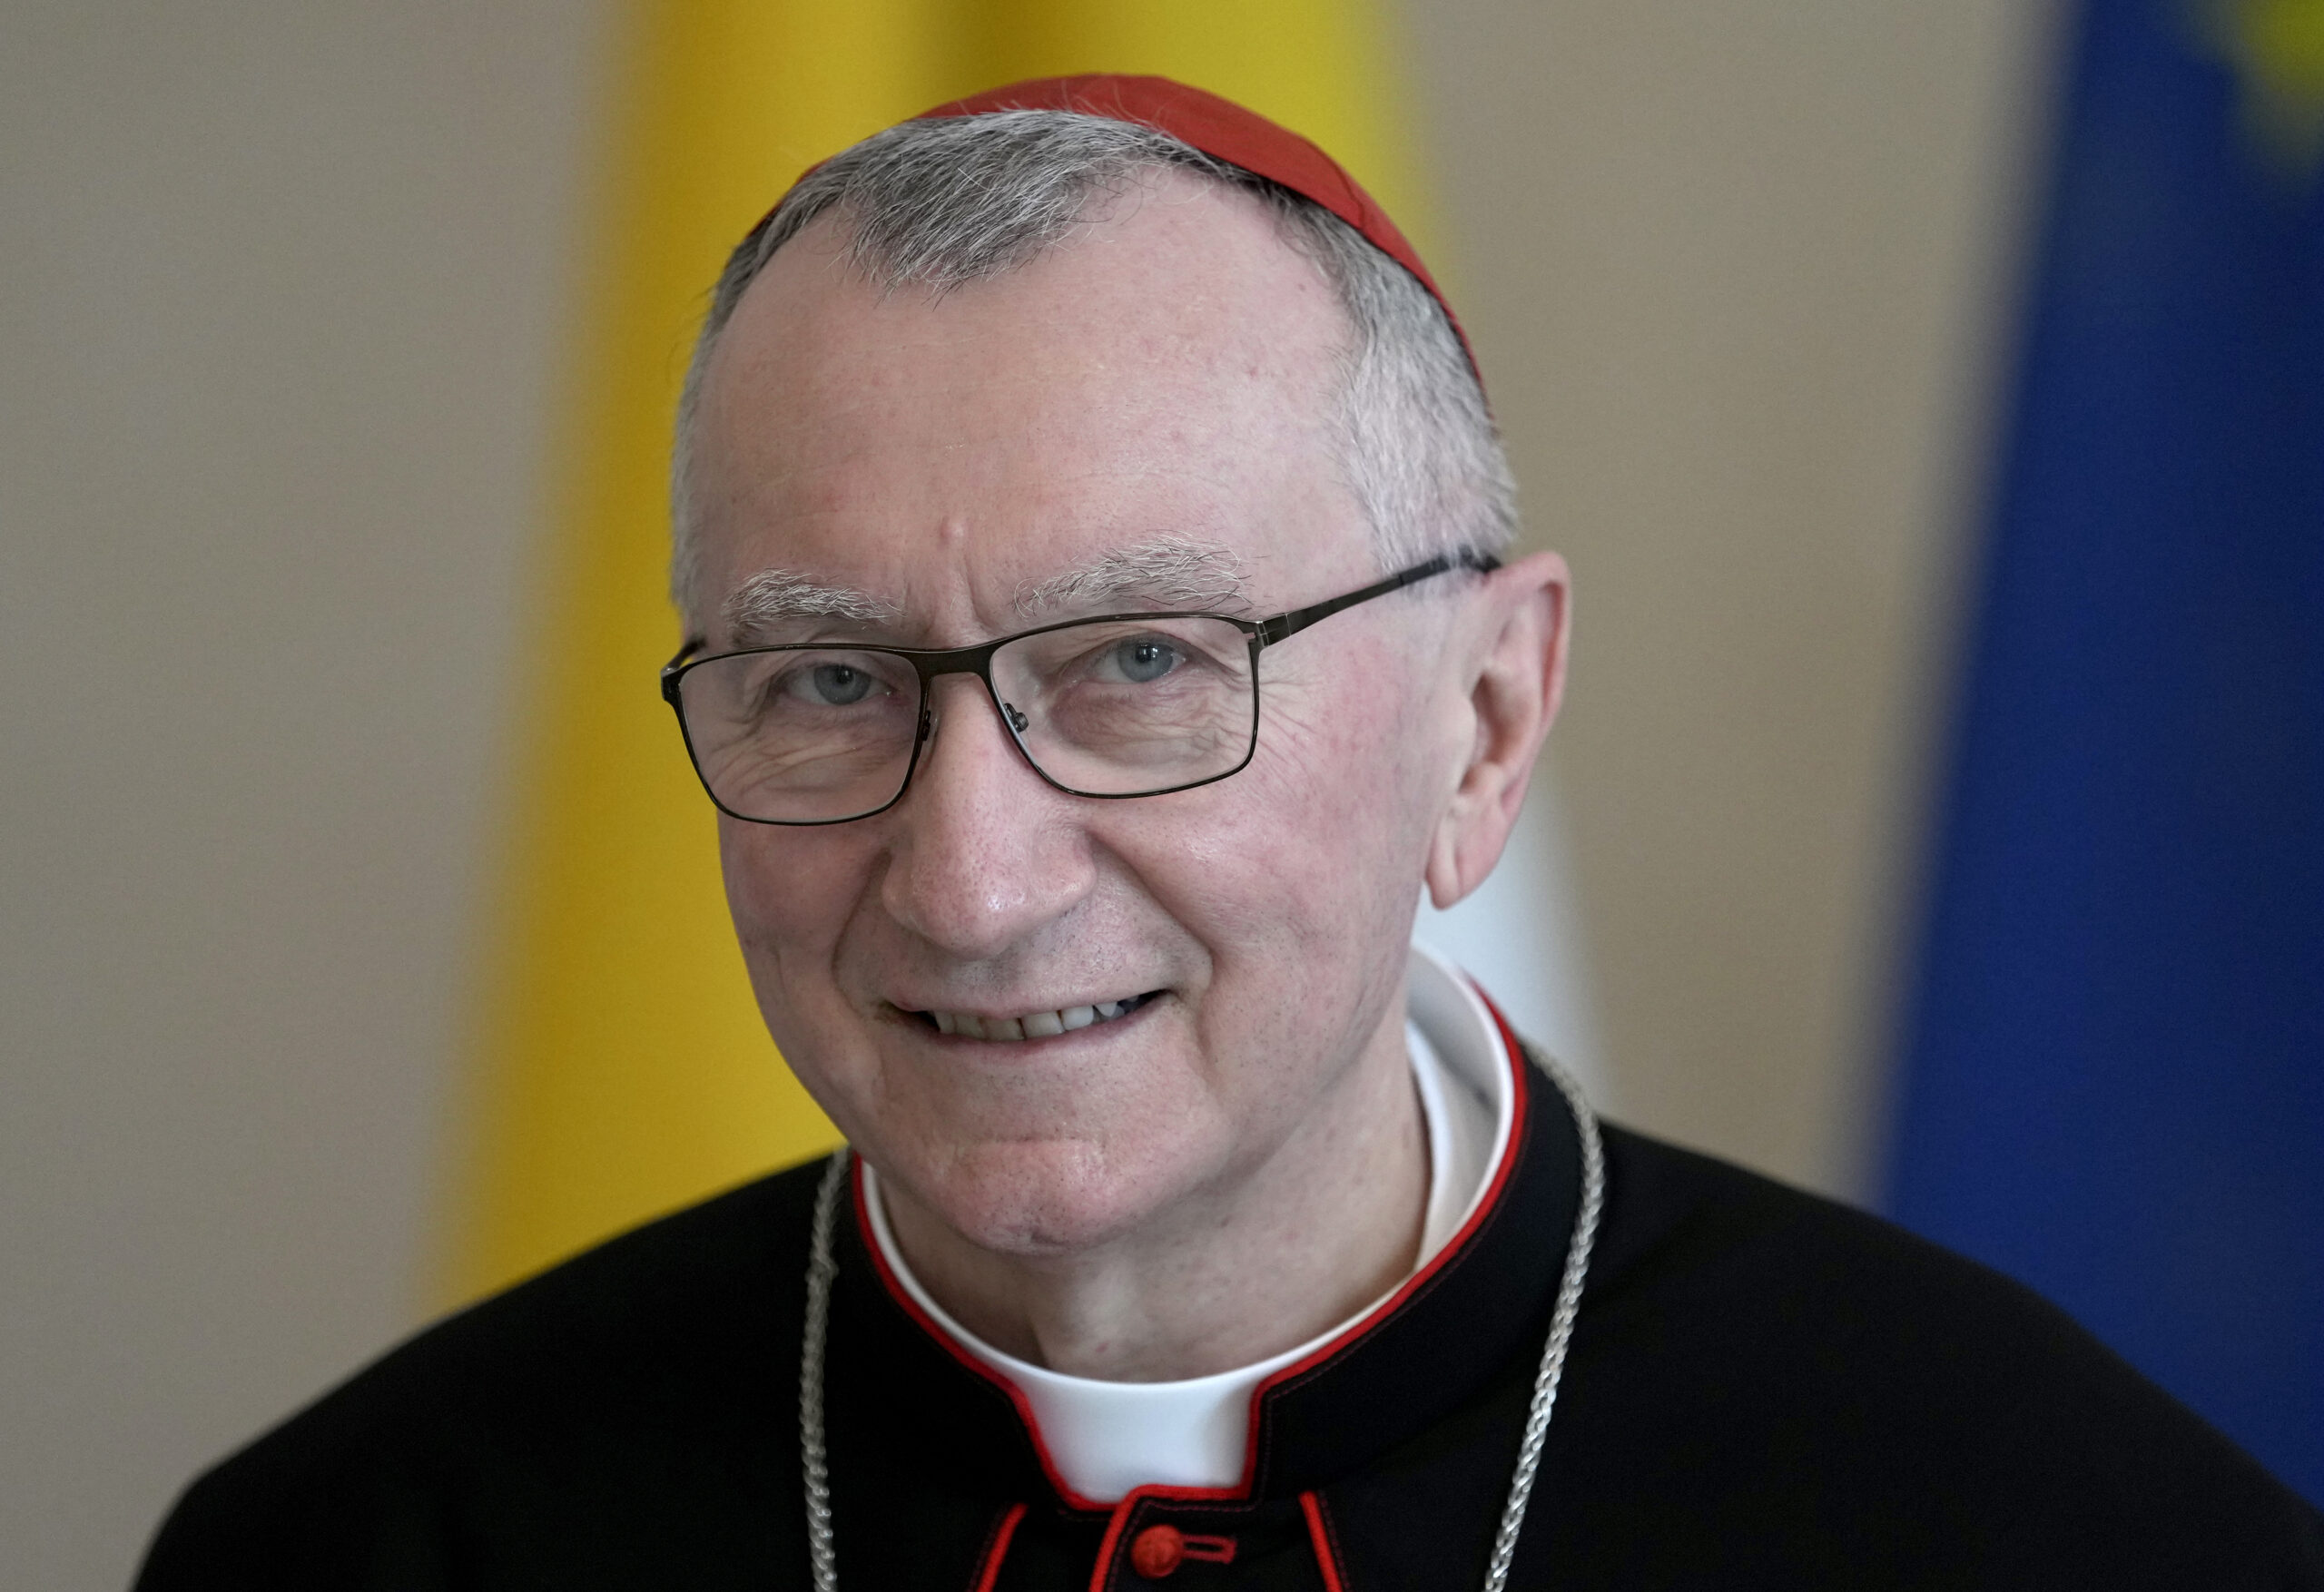 Vatican Secretary of State Cardinal Pietro Parolin smiles during a meeting at the Bellevue palace in Berlin on June 29, 2021. (AP Photo/Michael Sohn, File)